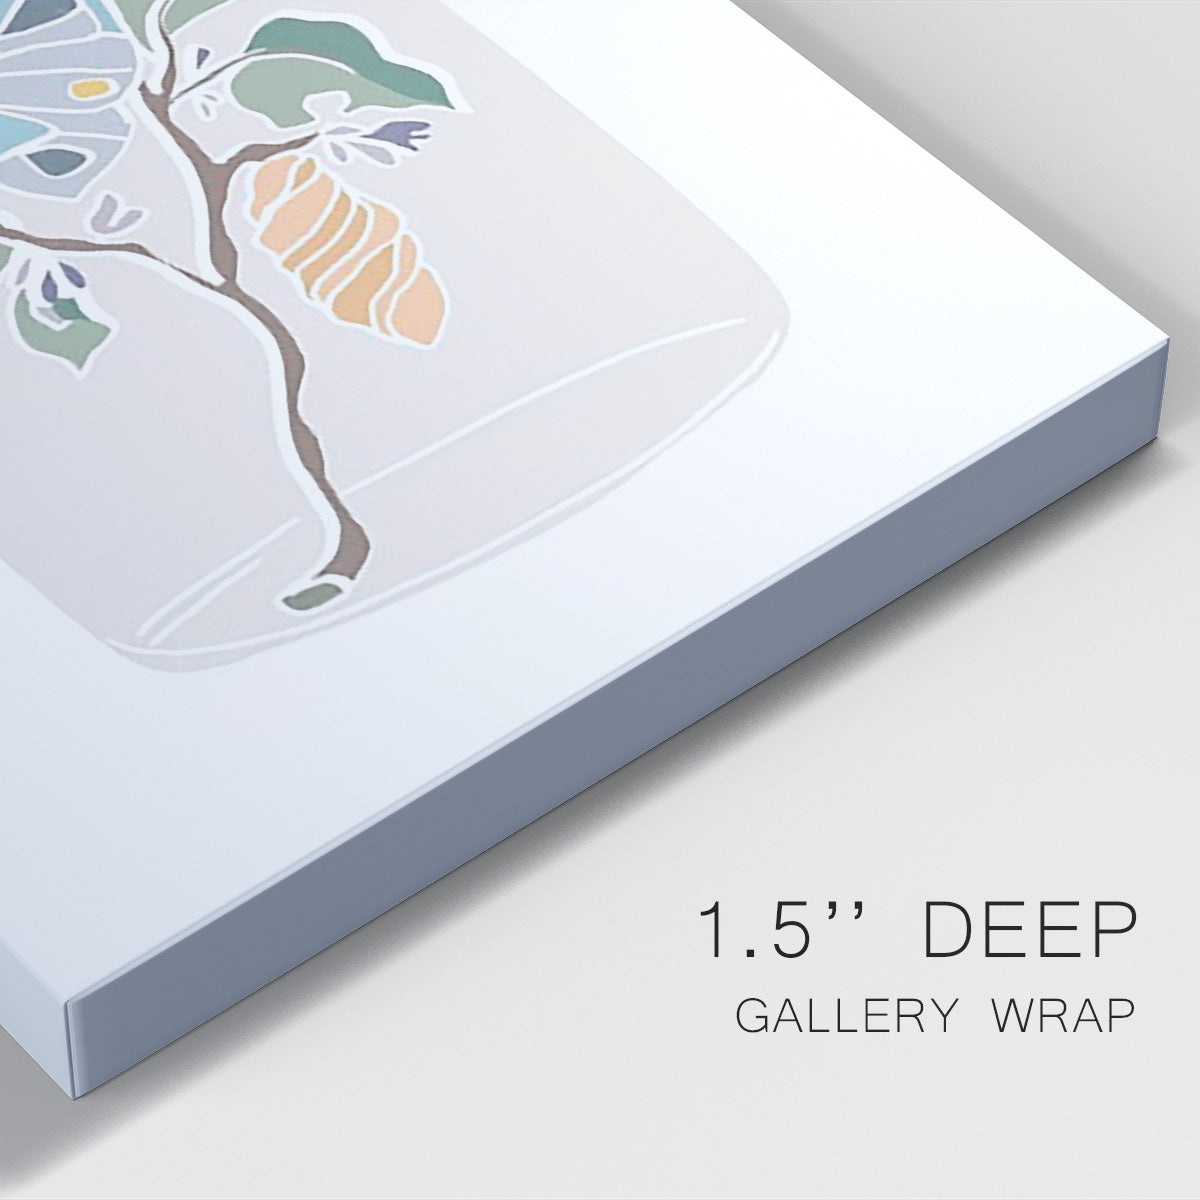 Nature Jar II Premium Gallery Wrapped Canvas - Ready to Hang